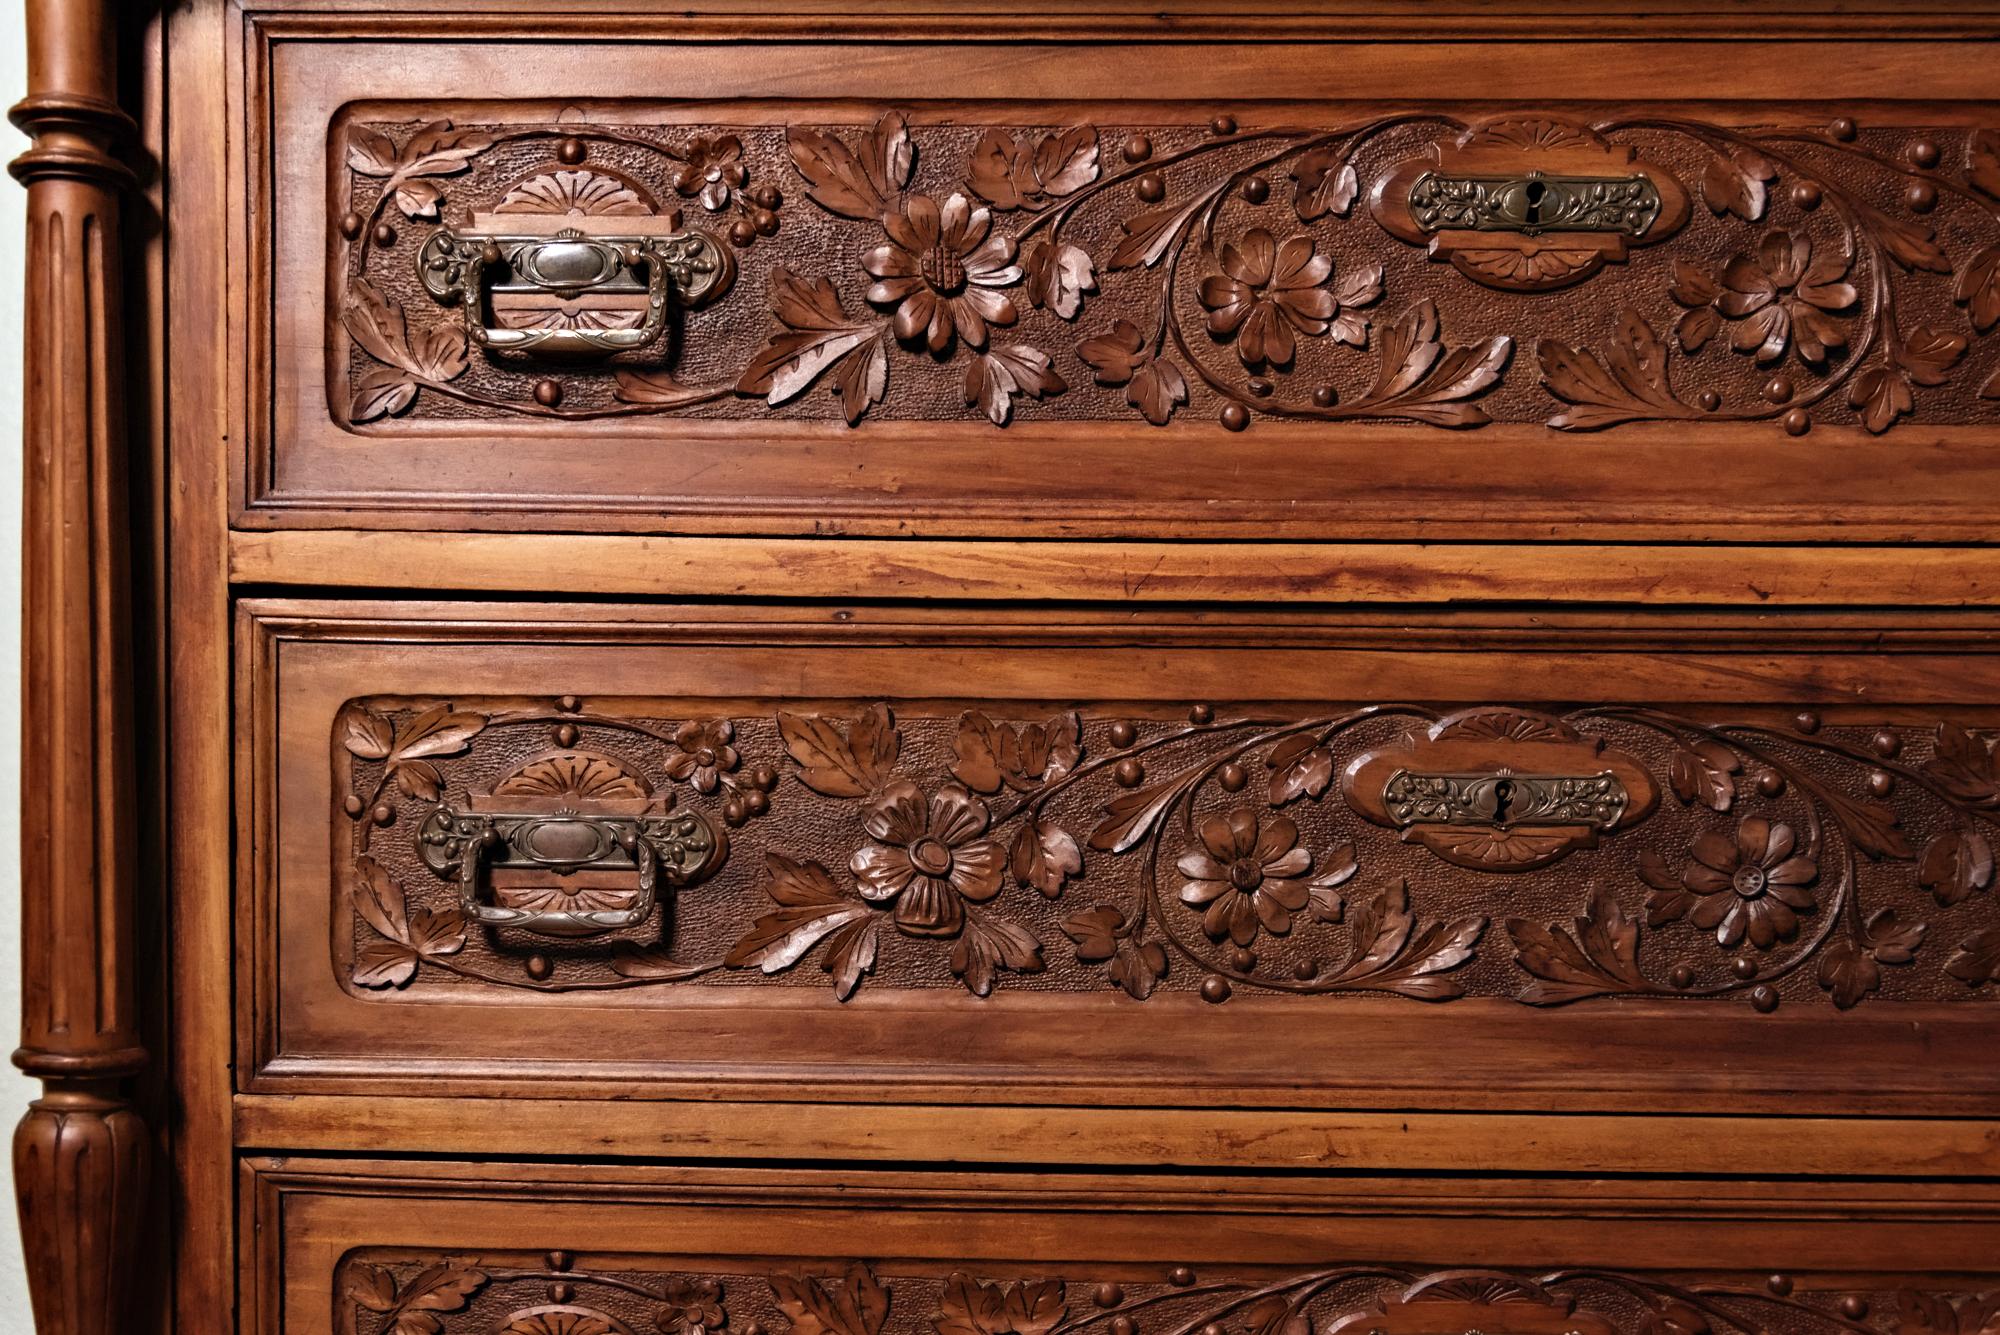 19th century Italian Renaissance walnut commode represents the essence of the style with elaborately carved bas relief and full relief naturalistic leaf and floral motifs across the entire facade. It features bun feet and beautifully carved columns